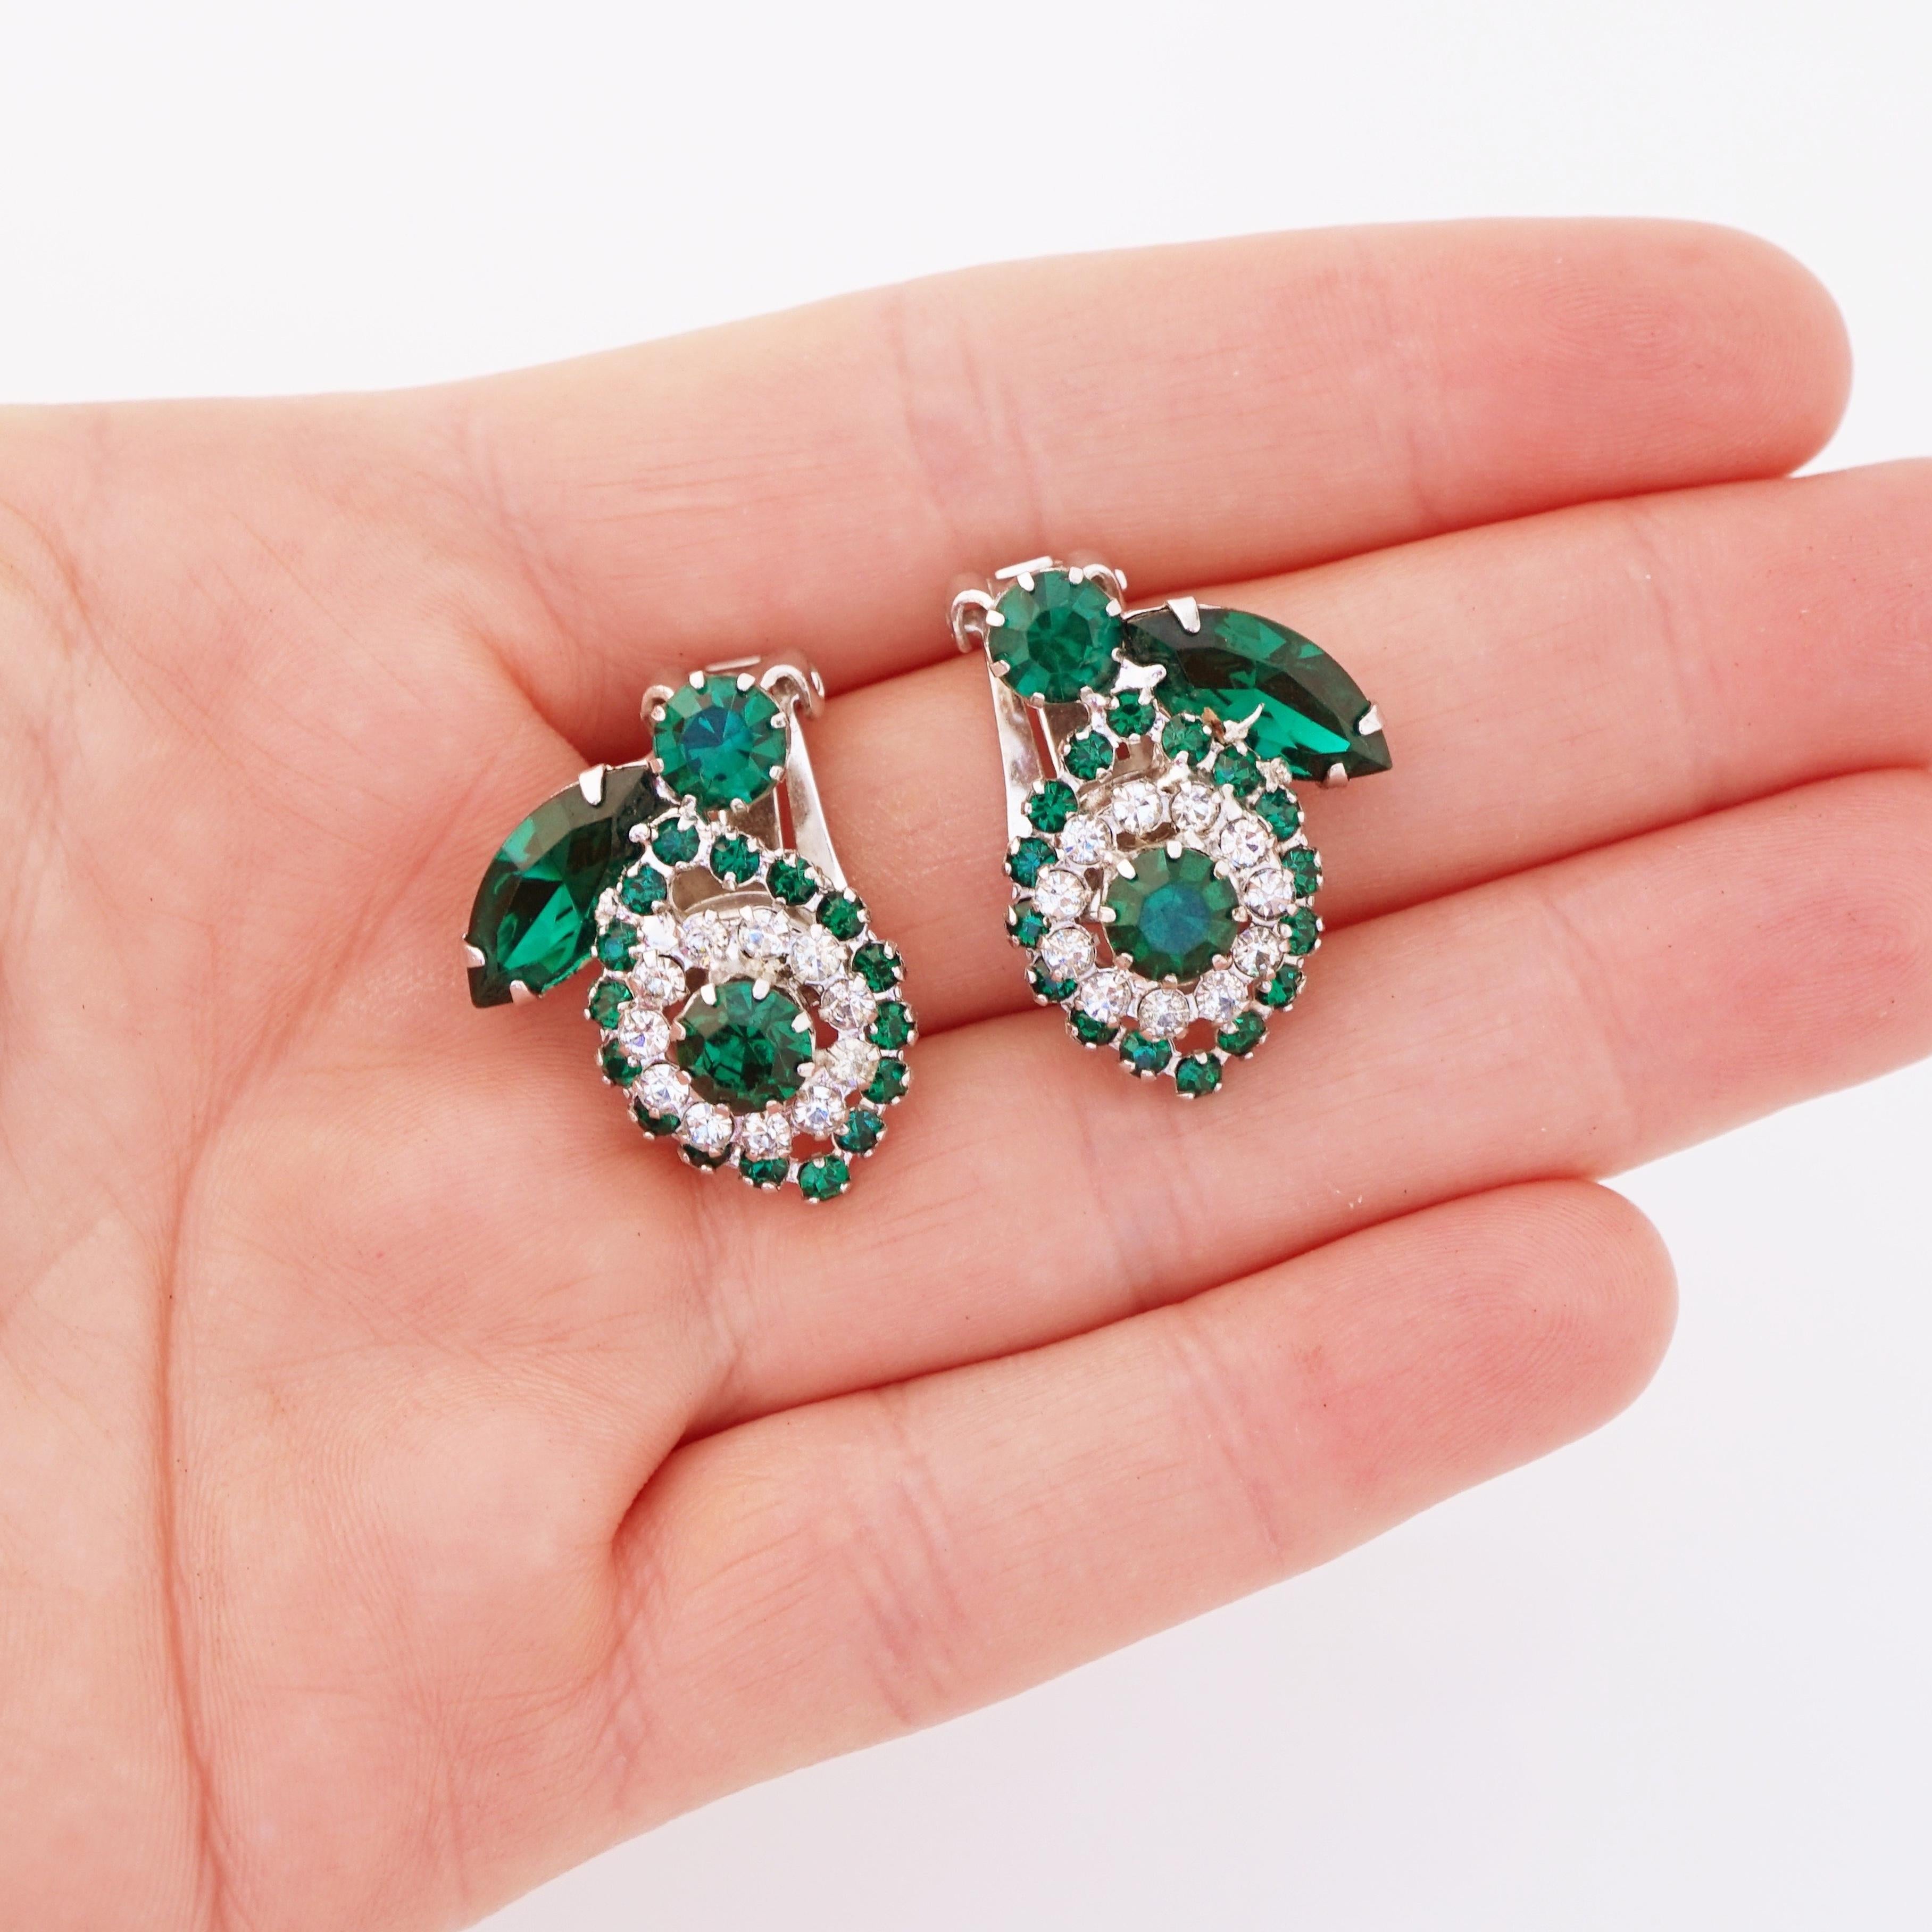 Emerald Rhinestone Floral Cocktail Earrings By Weiss, 1950s 1